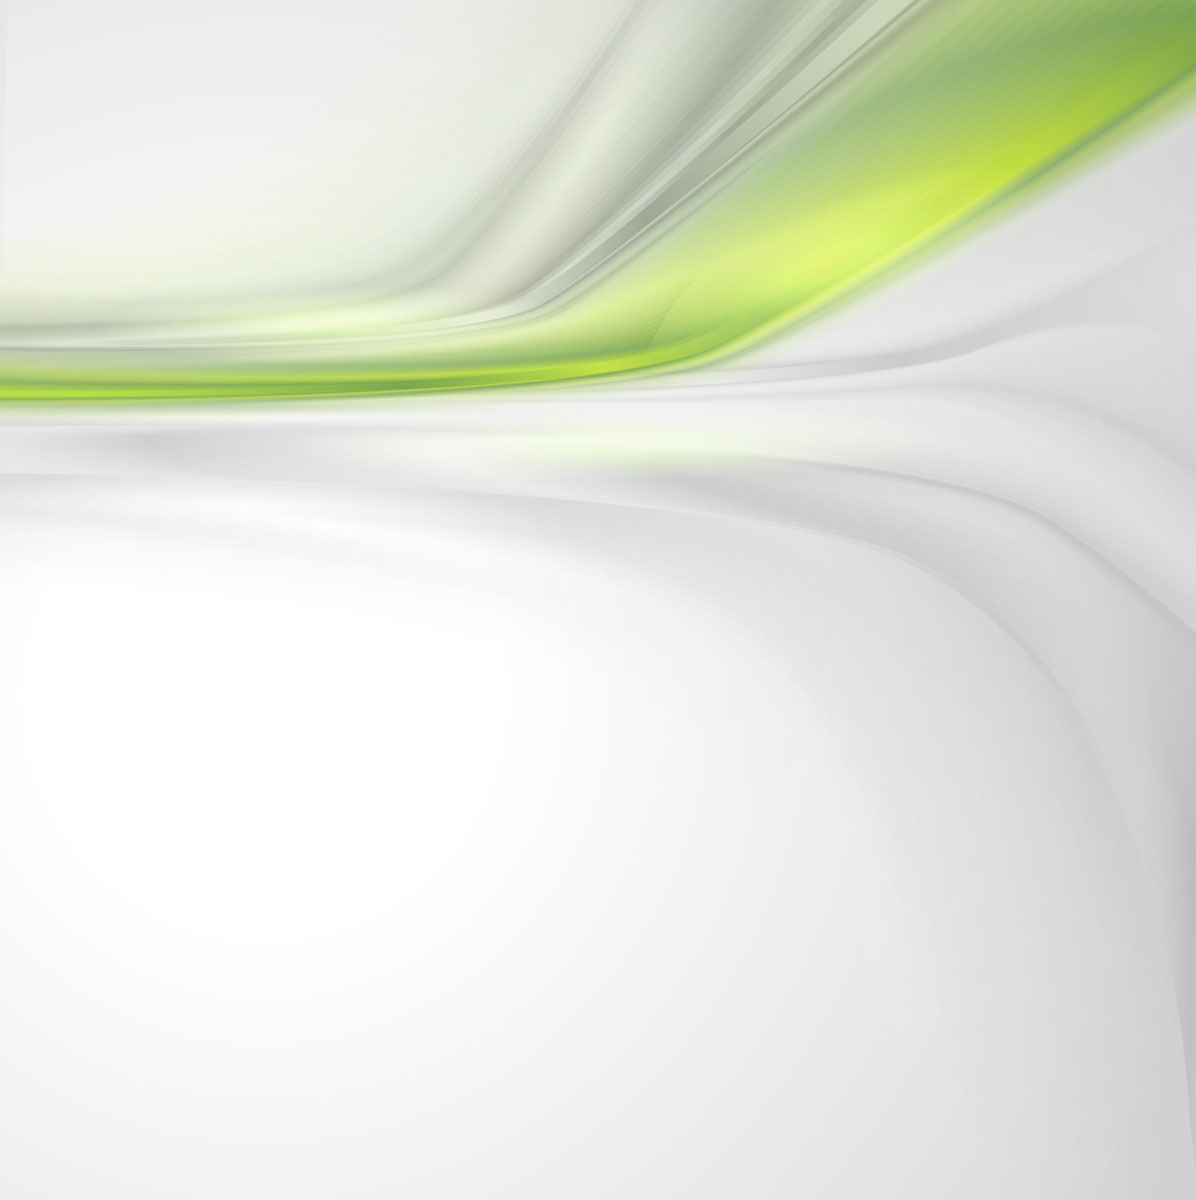 Abstract wavy green eco style background vector 15